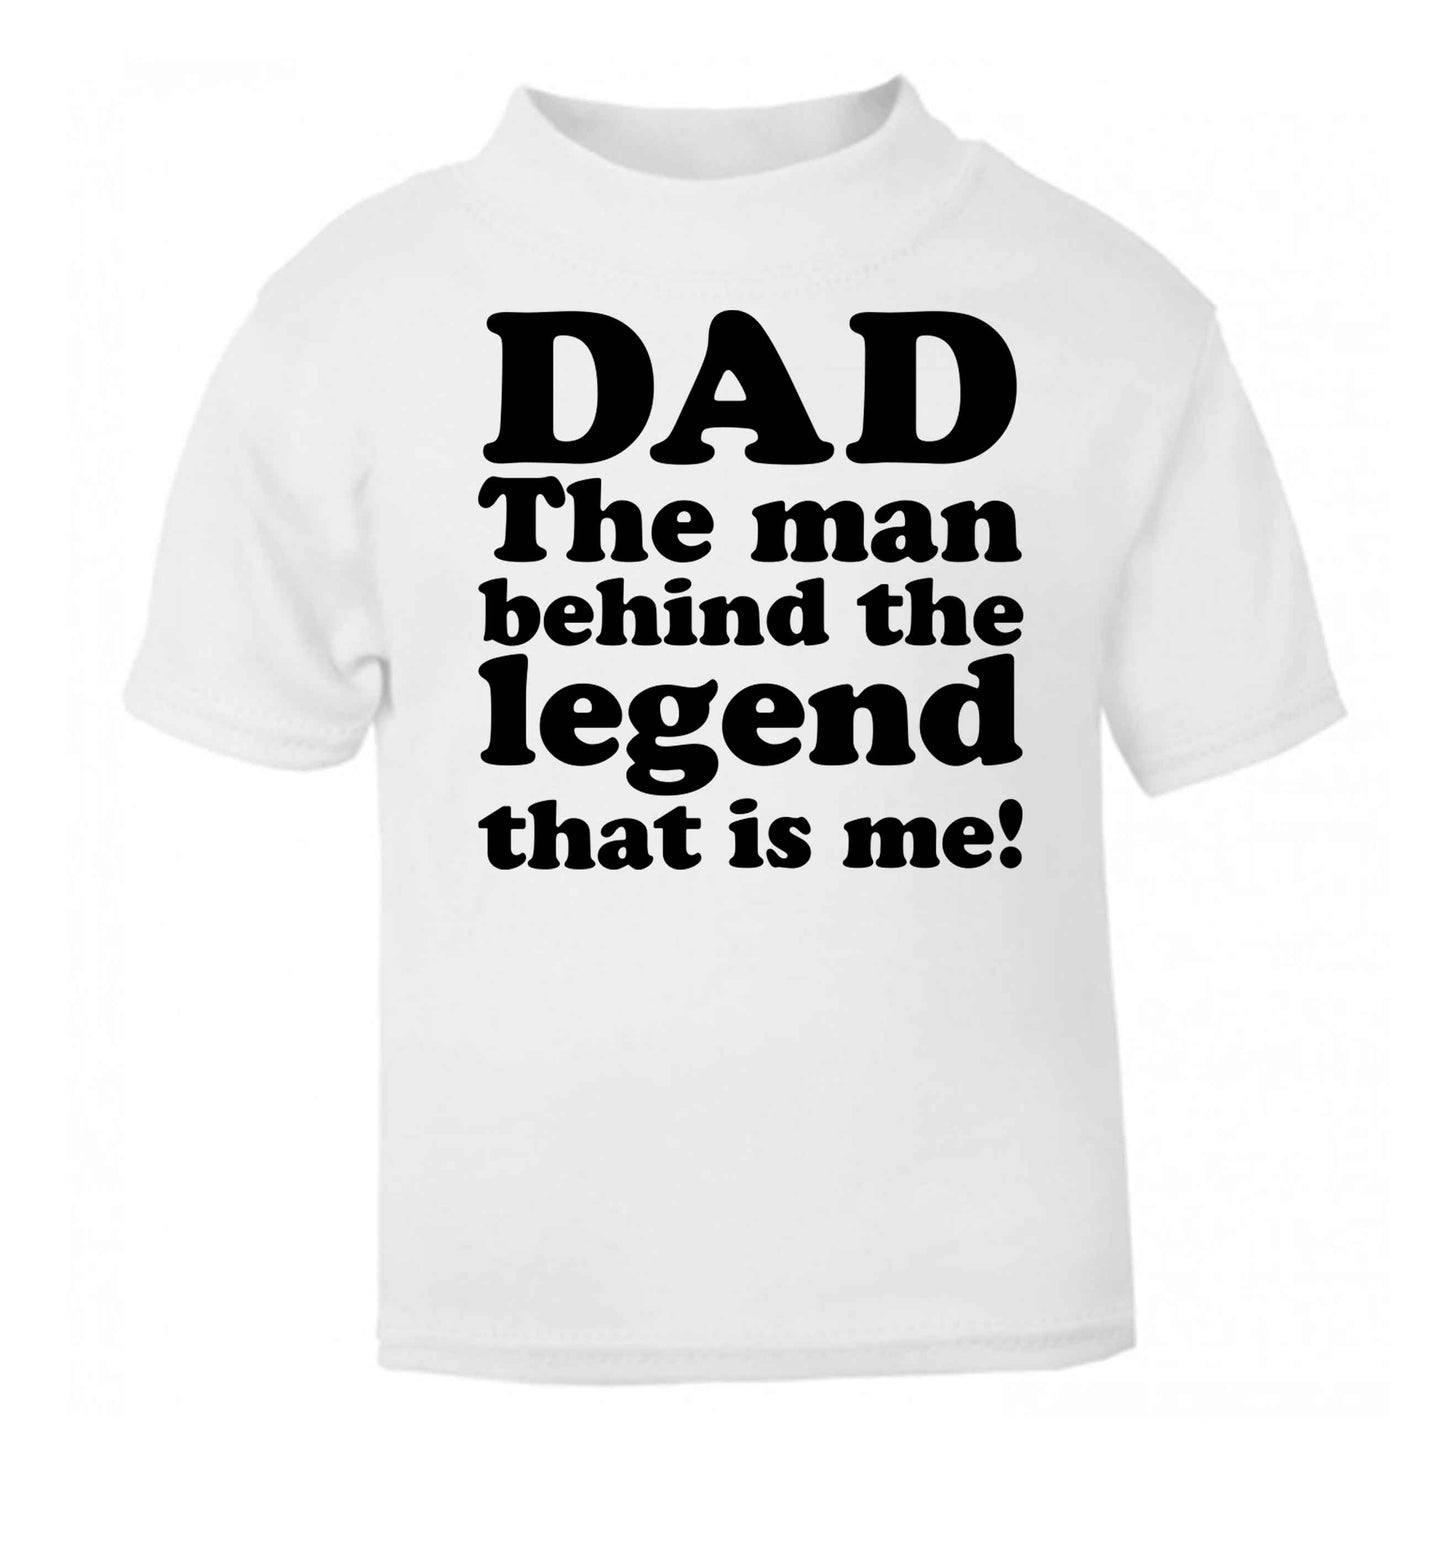 Dad the man behind the legend that is me white baby toddler Tshirt 2 Years